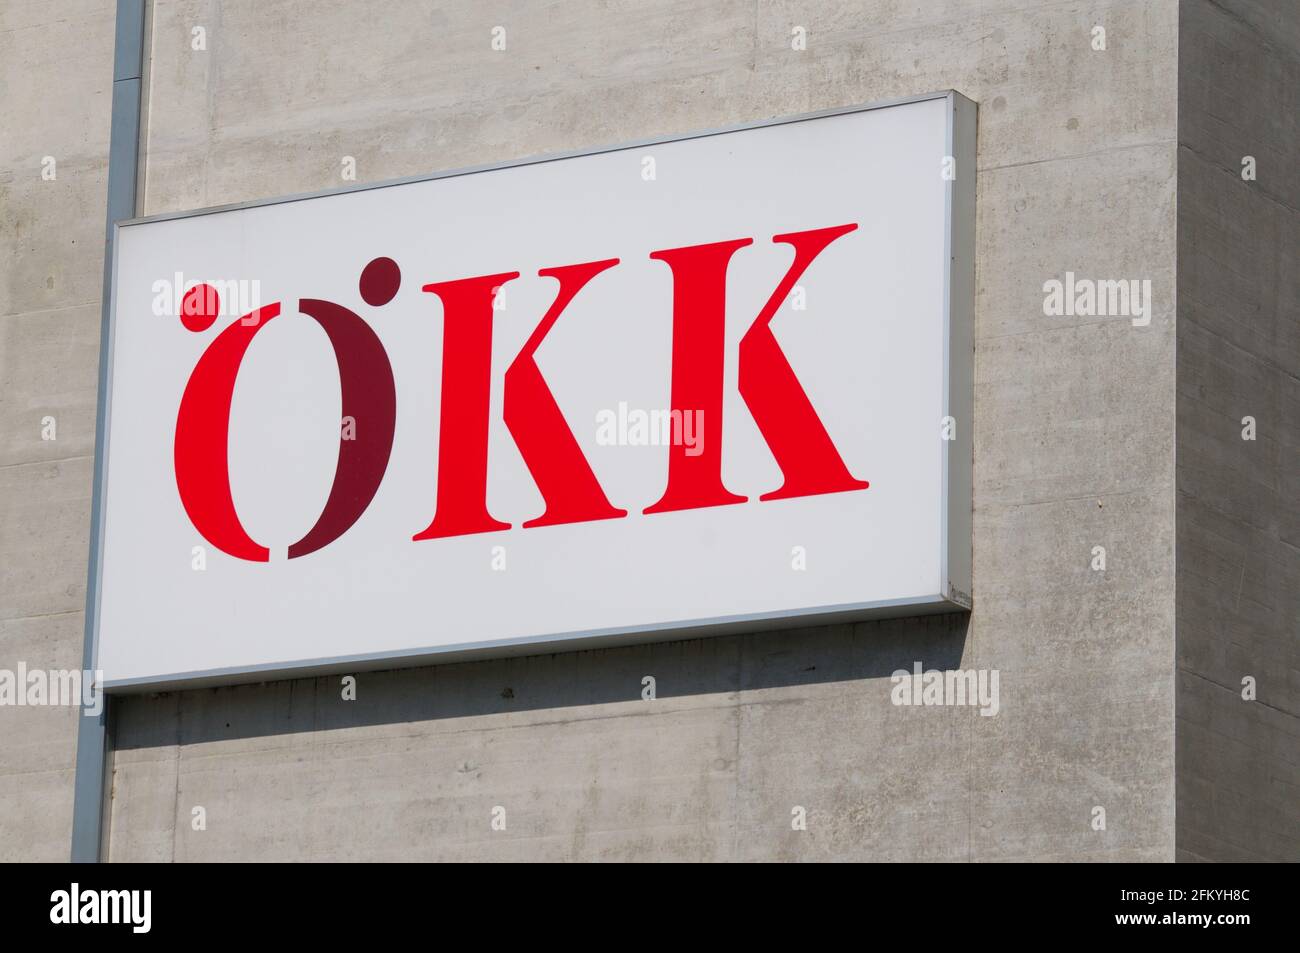 Okk High Resolution Stock Photography and Images - Alamy